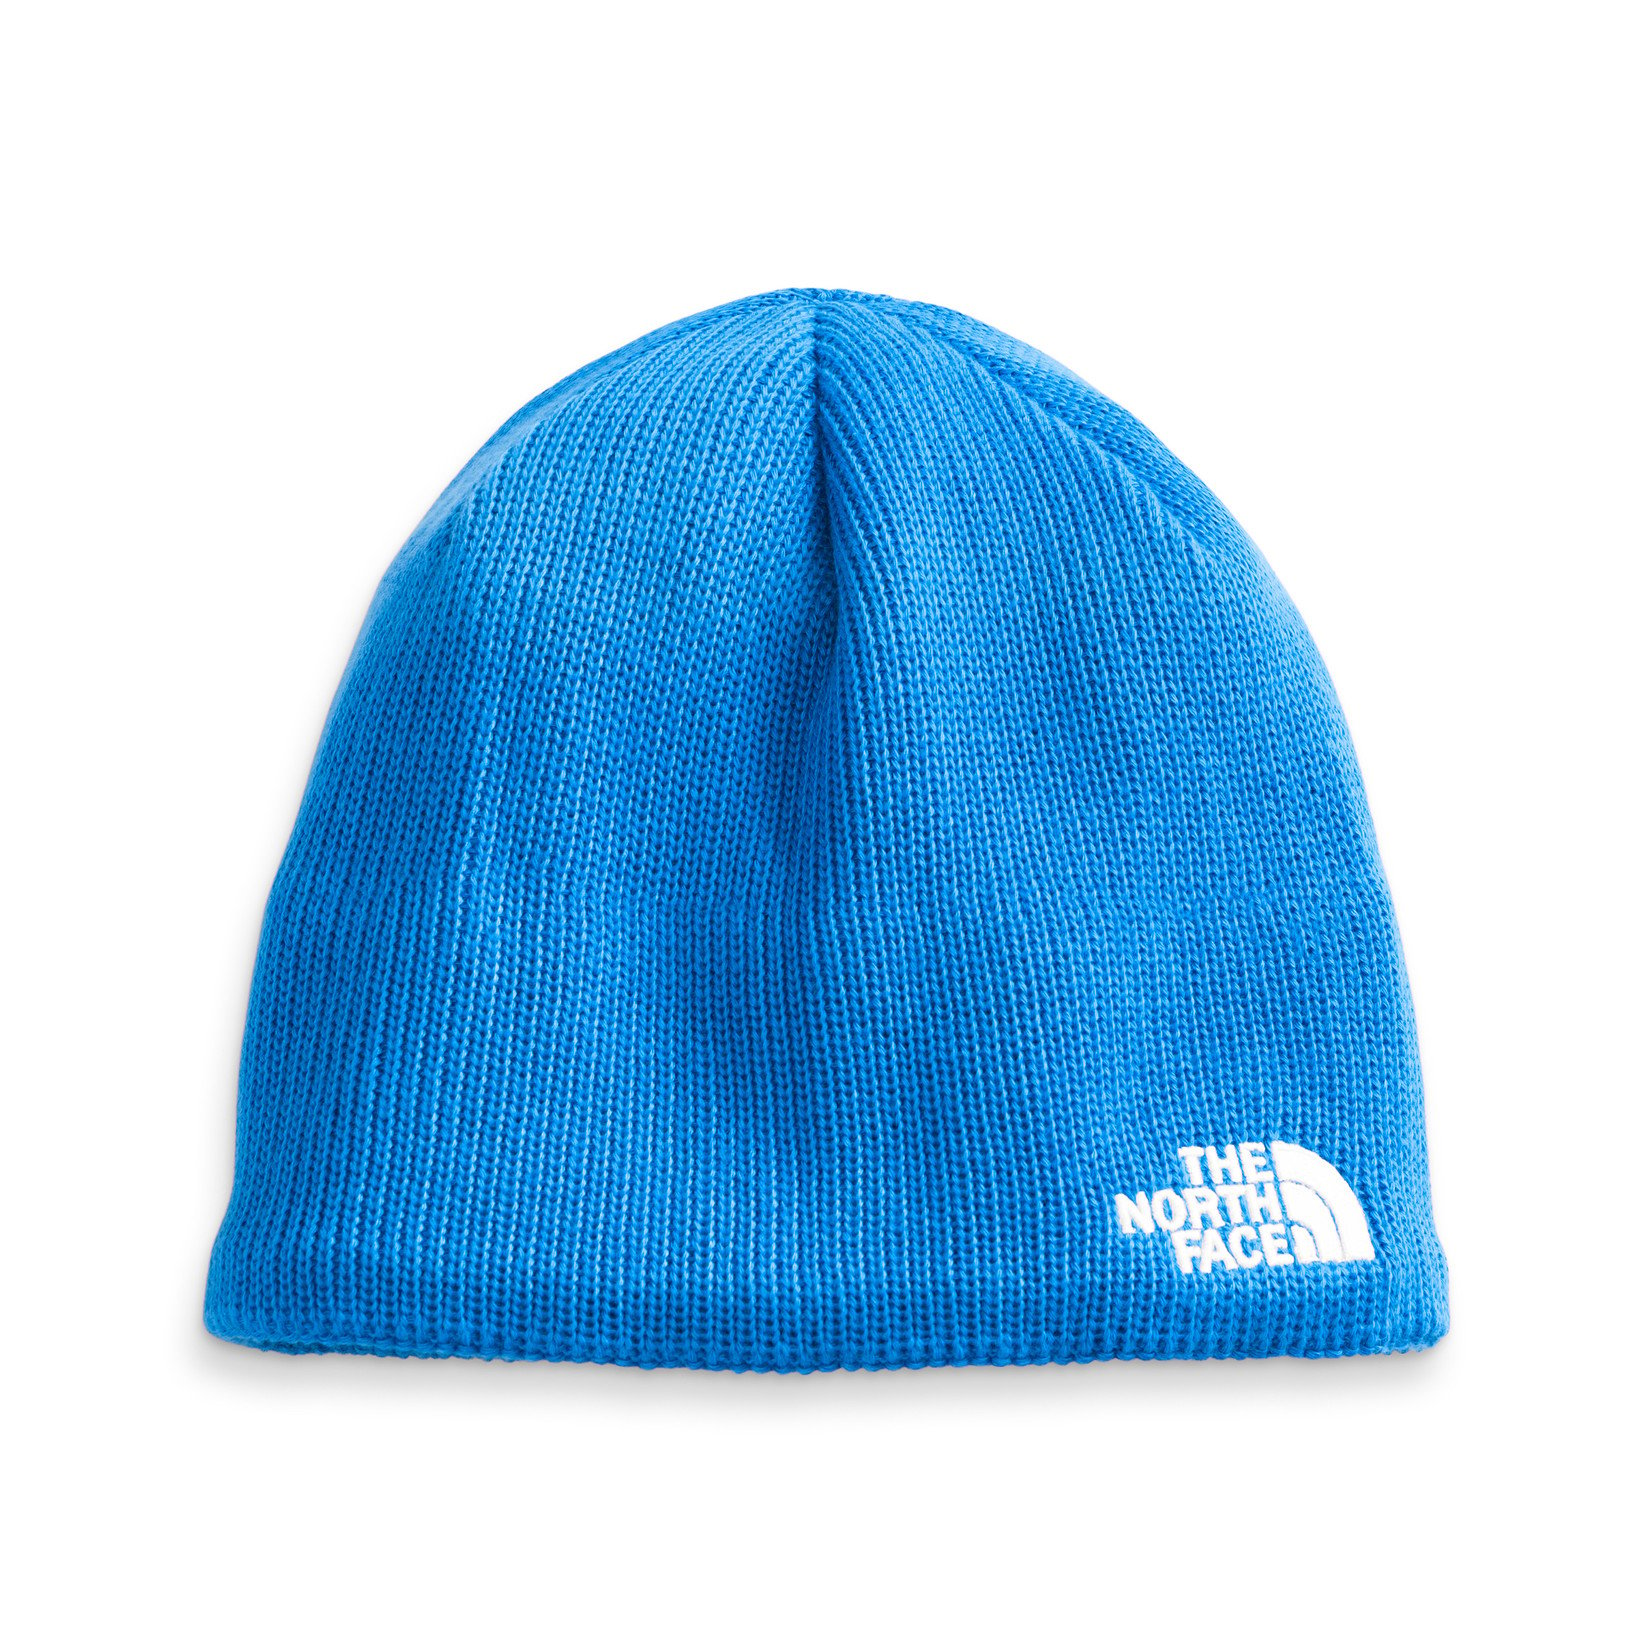 The North Face The North Face Youth Bones Recycled Beanie